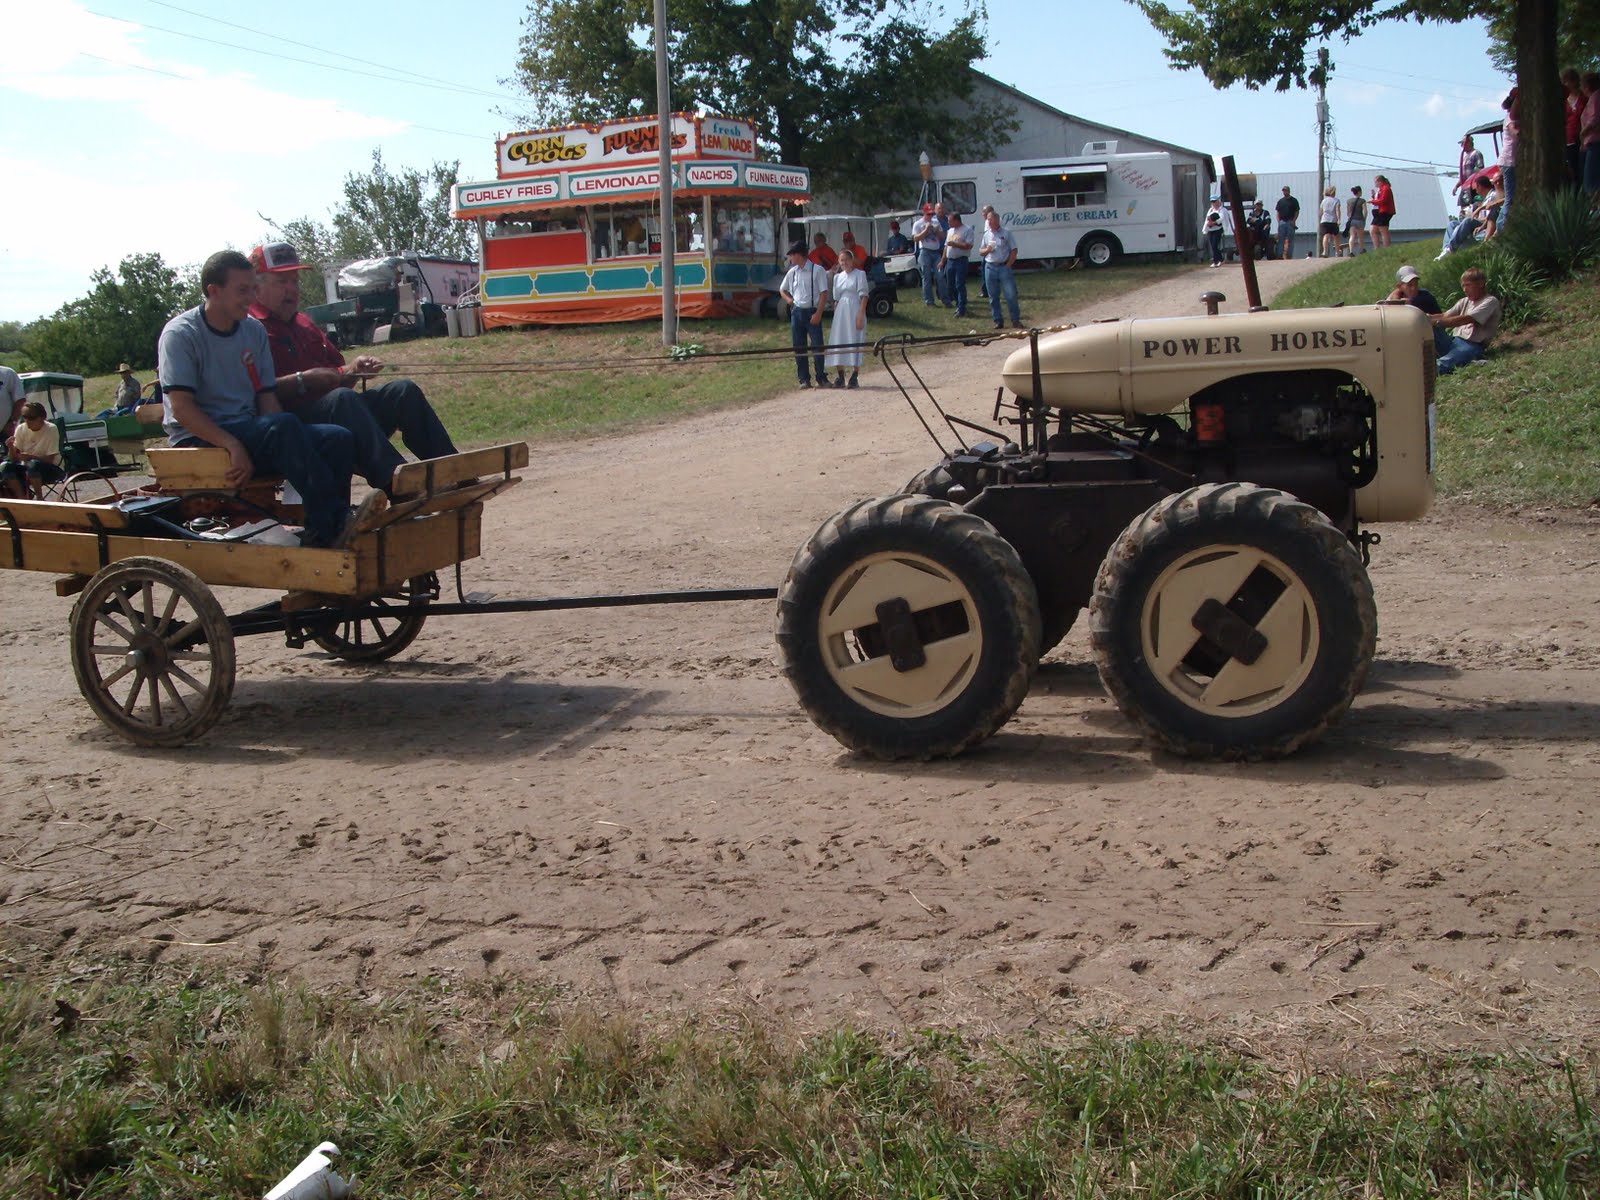 Power Horse tractors were steered with reins, similar to a real horse